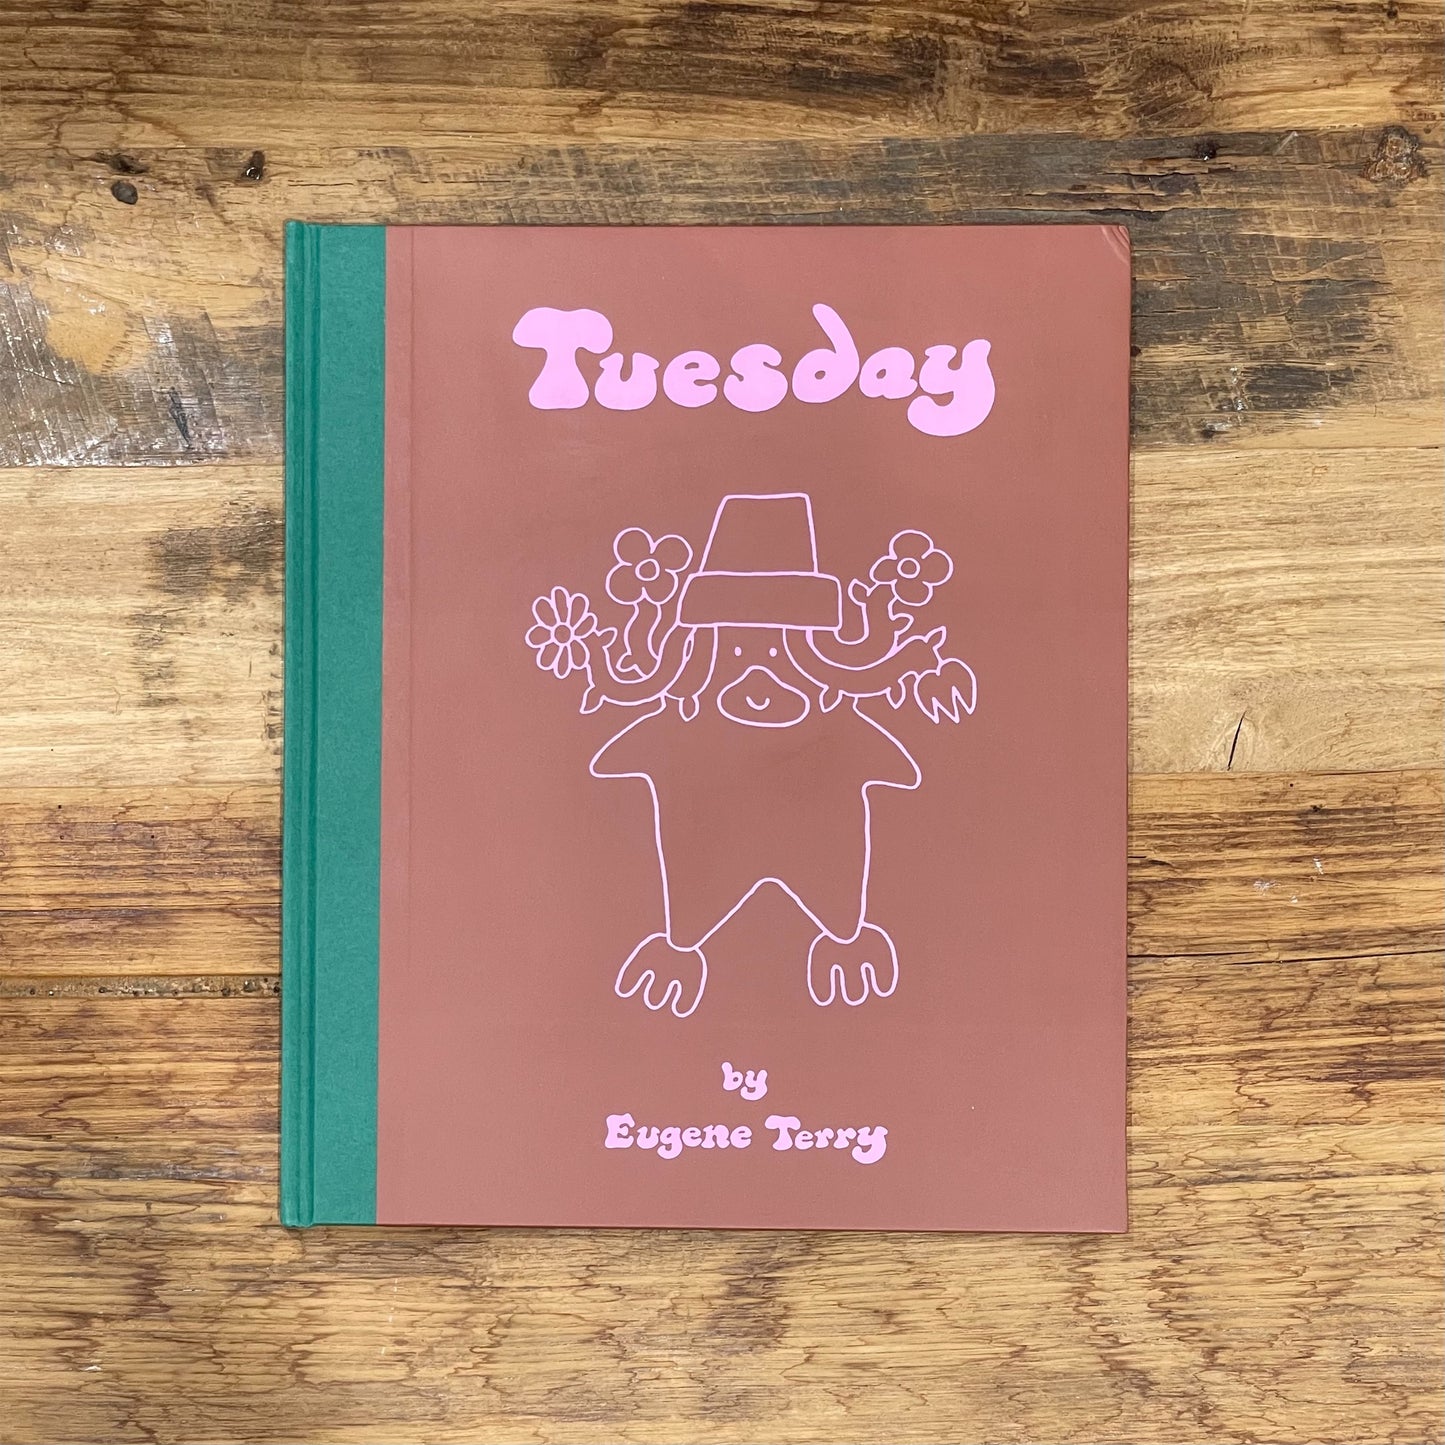 Tuesday by Eugene Terry / Dizzy Books